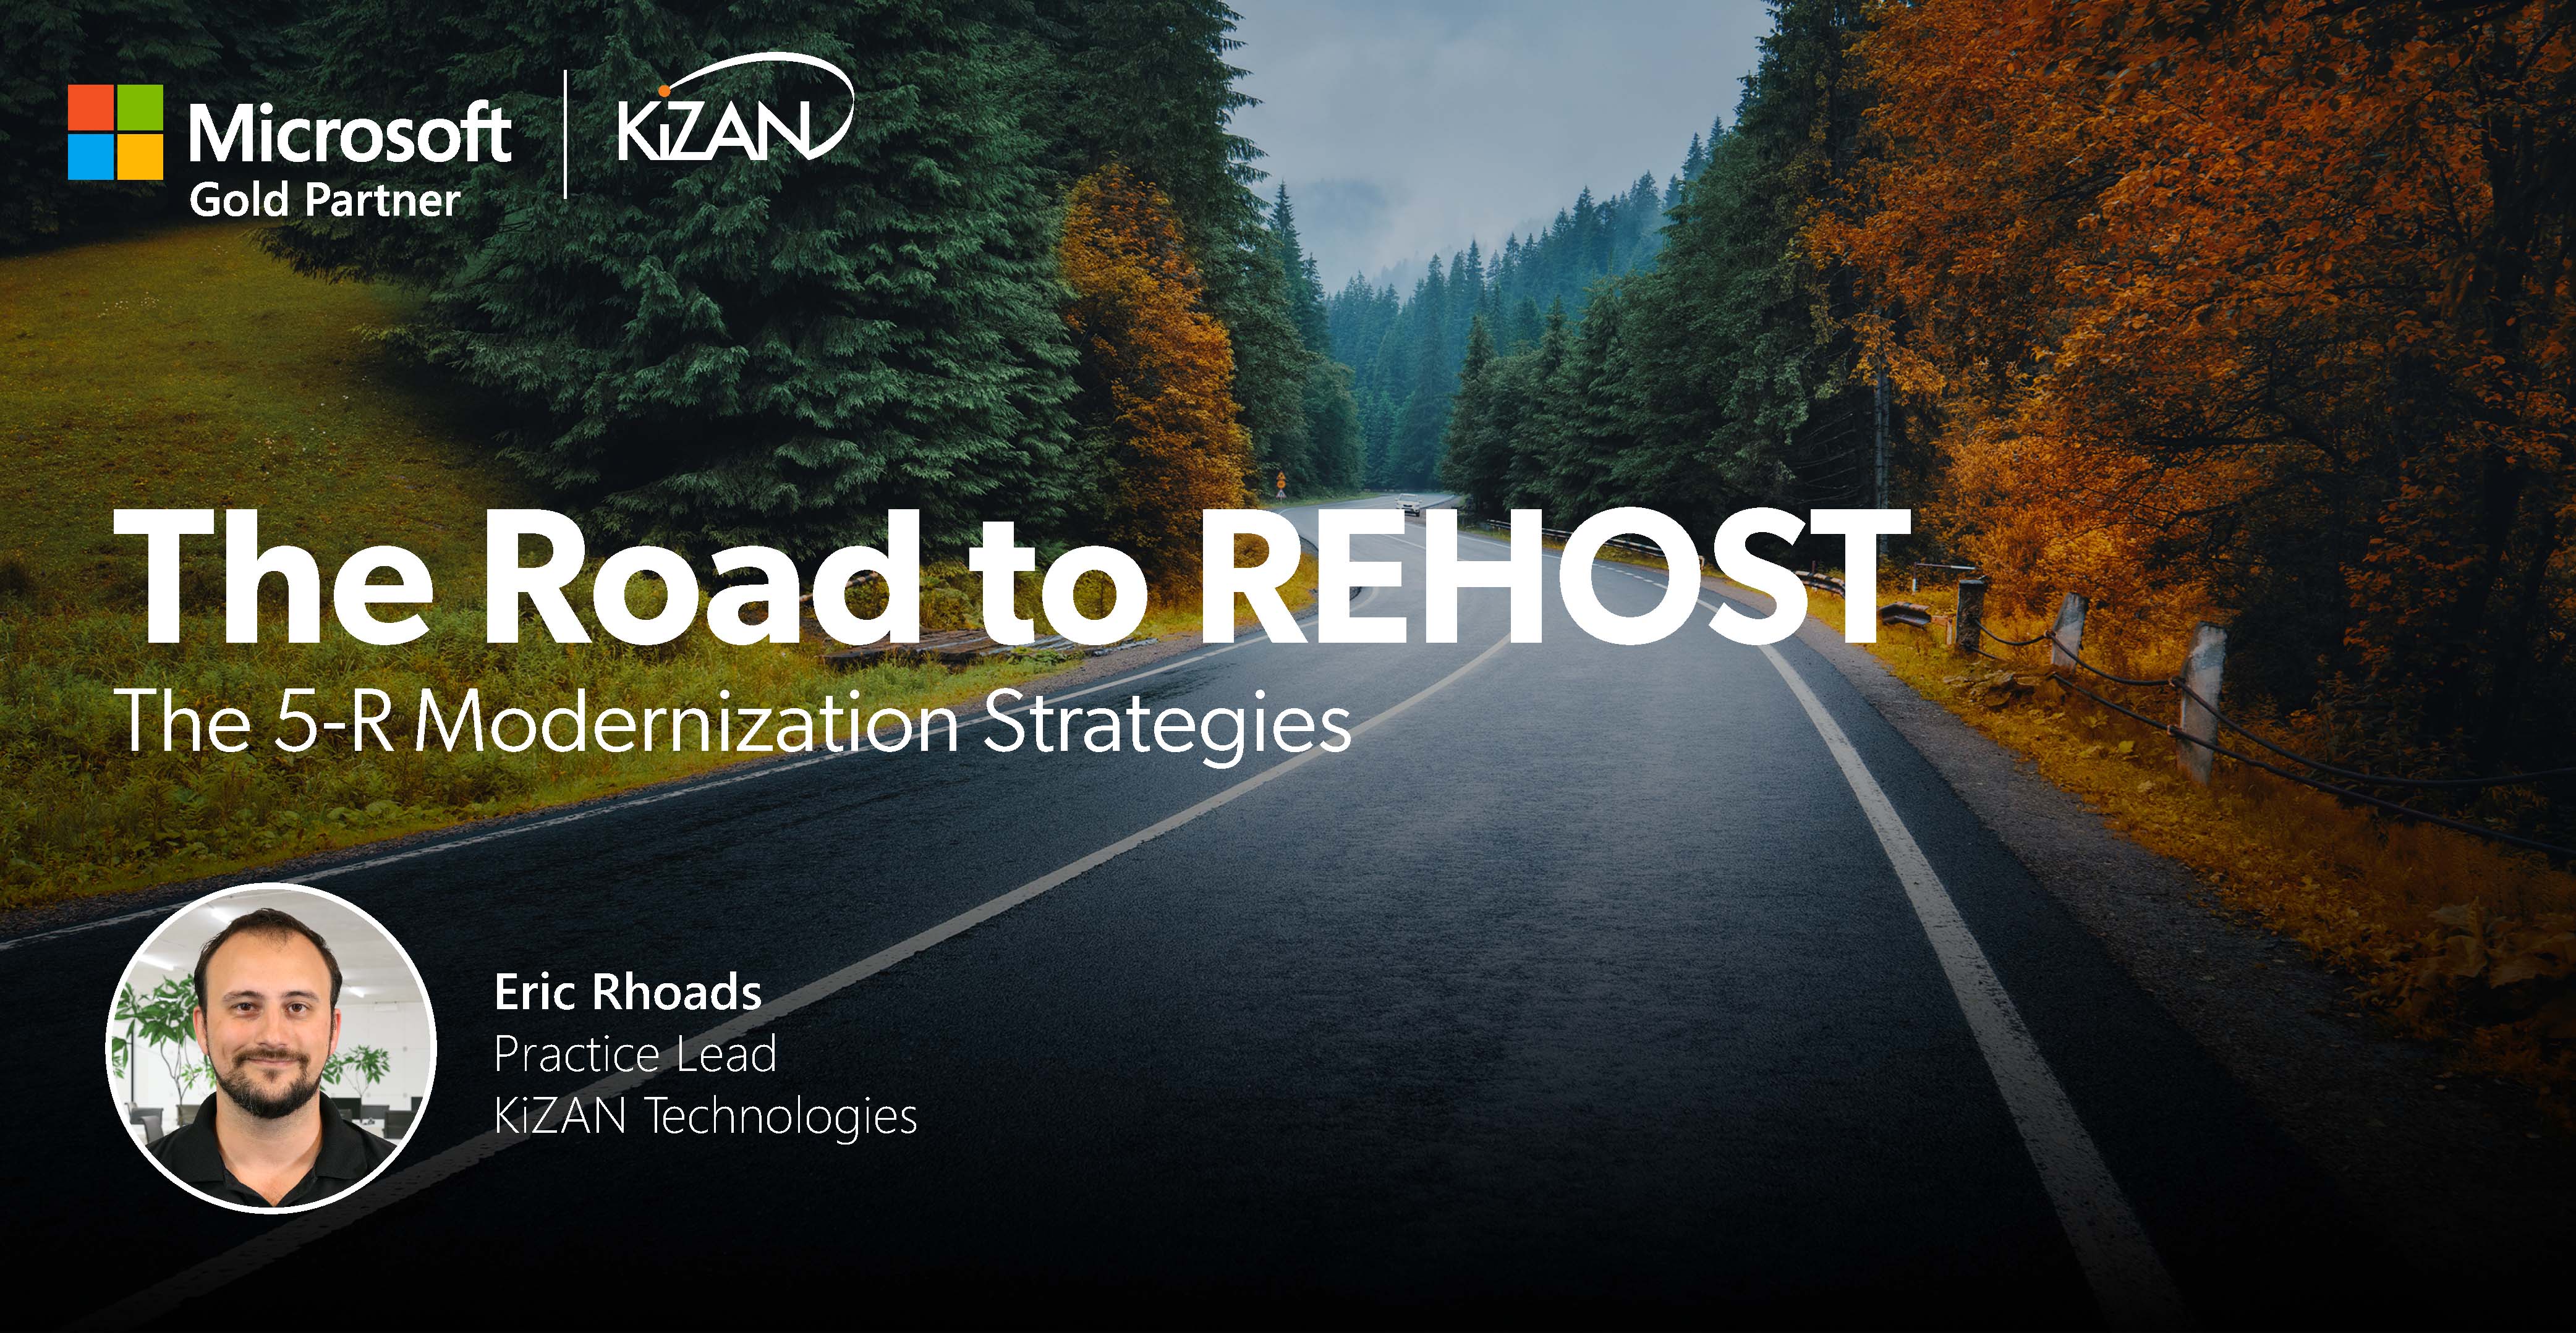 The 5-R Modernization Strategies: The Road to REHOST